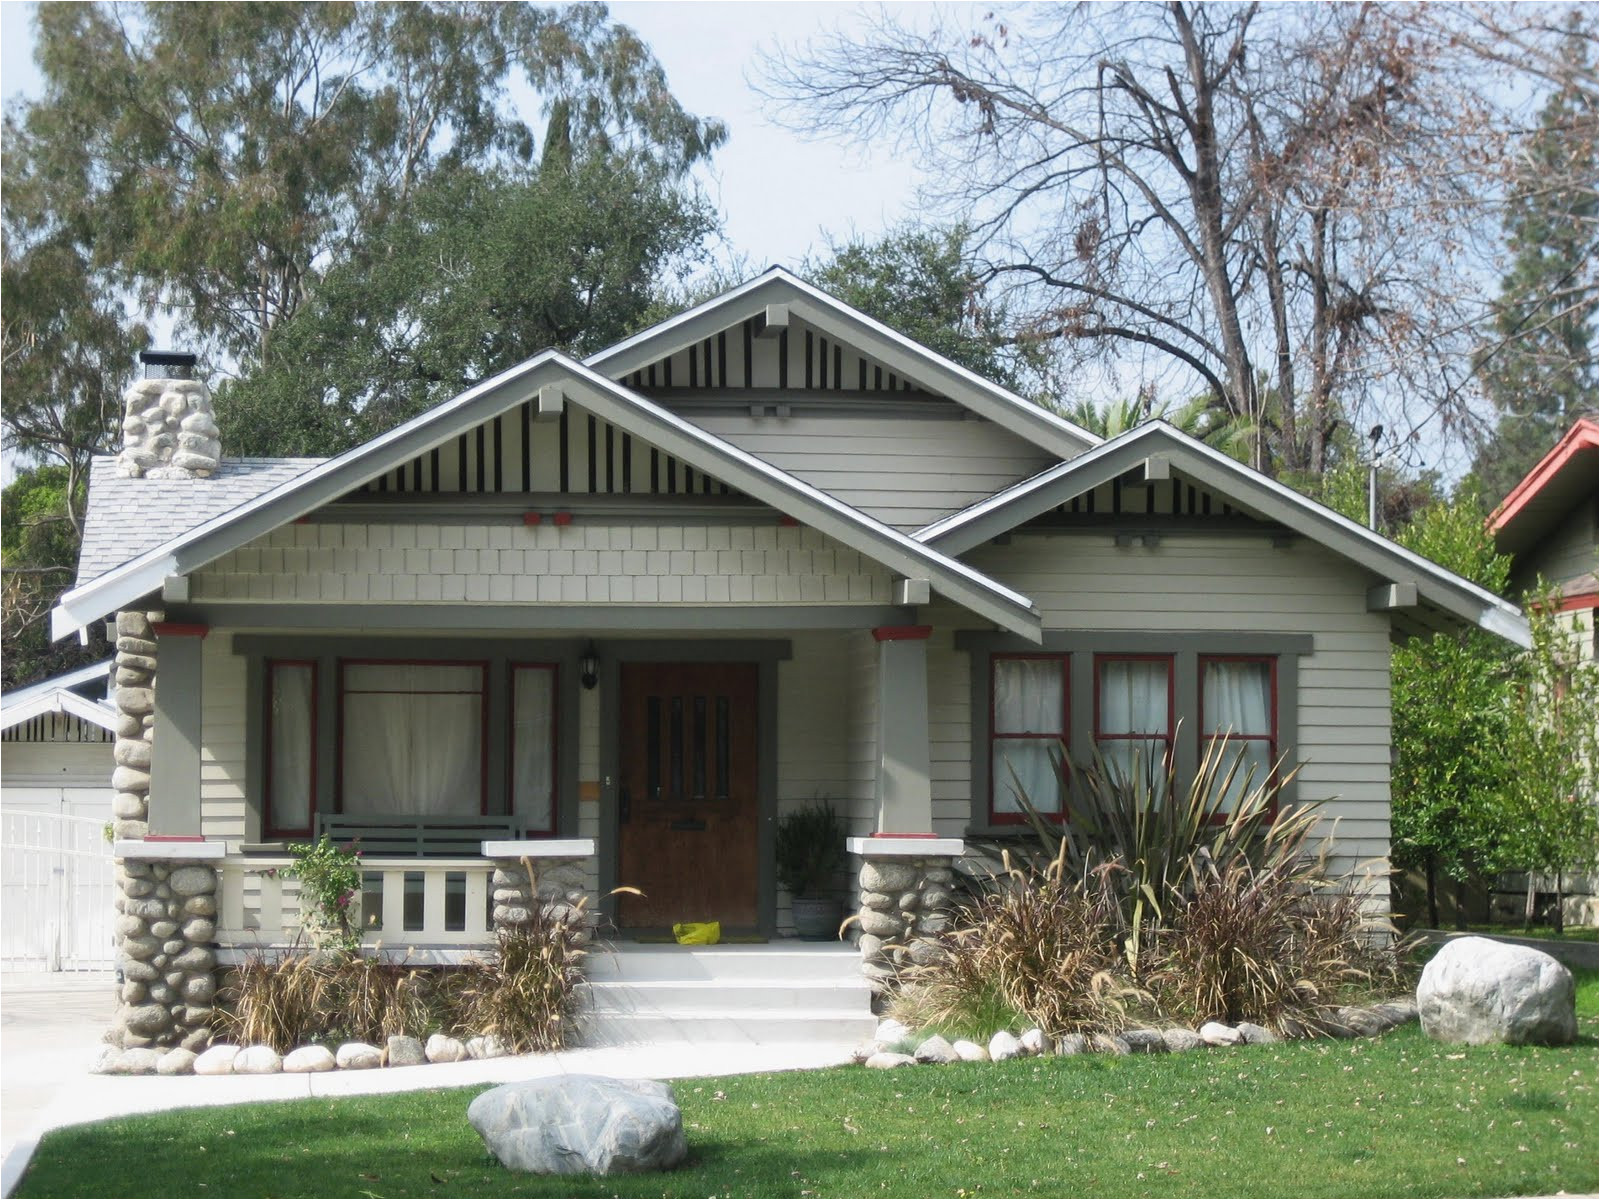 american bungalow style home